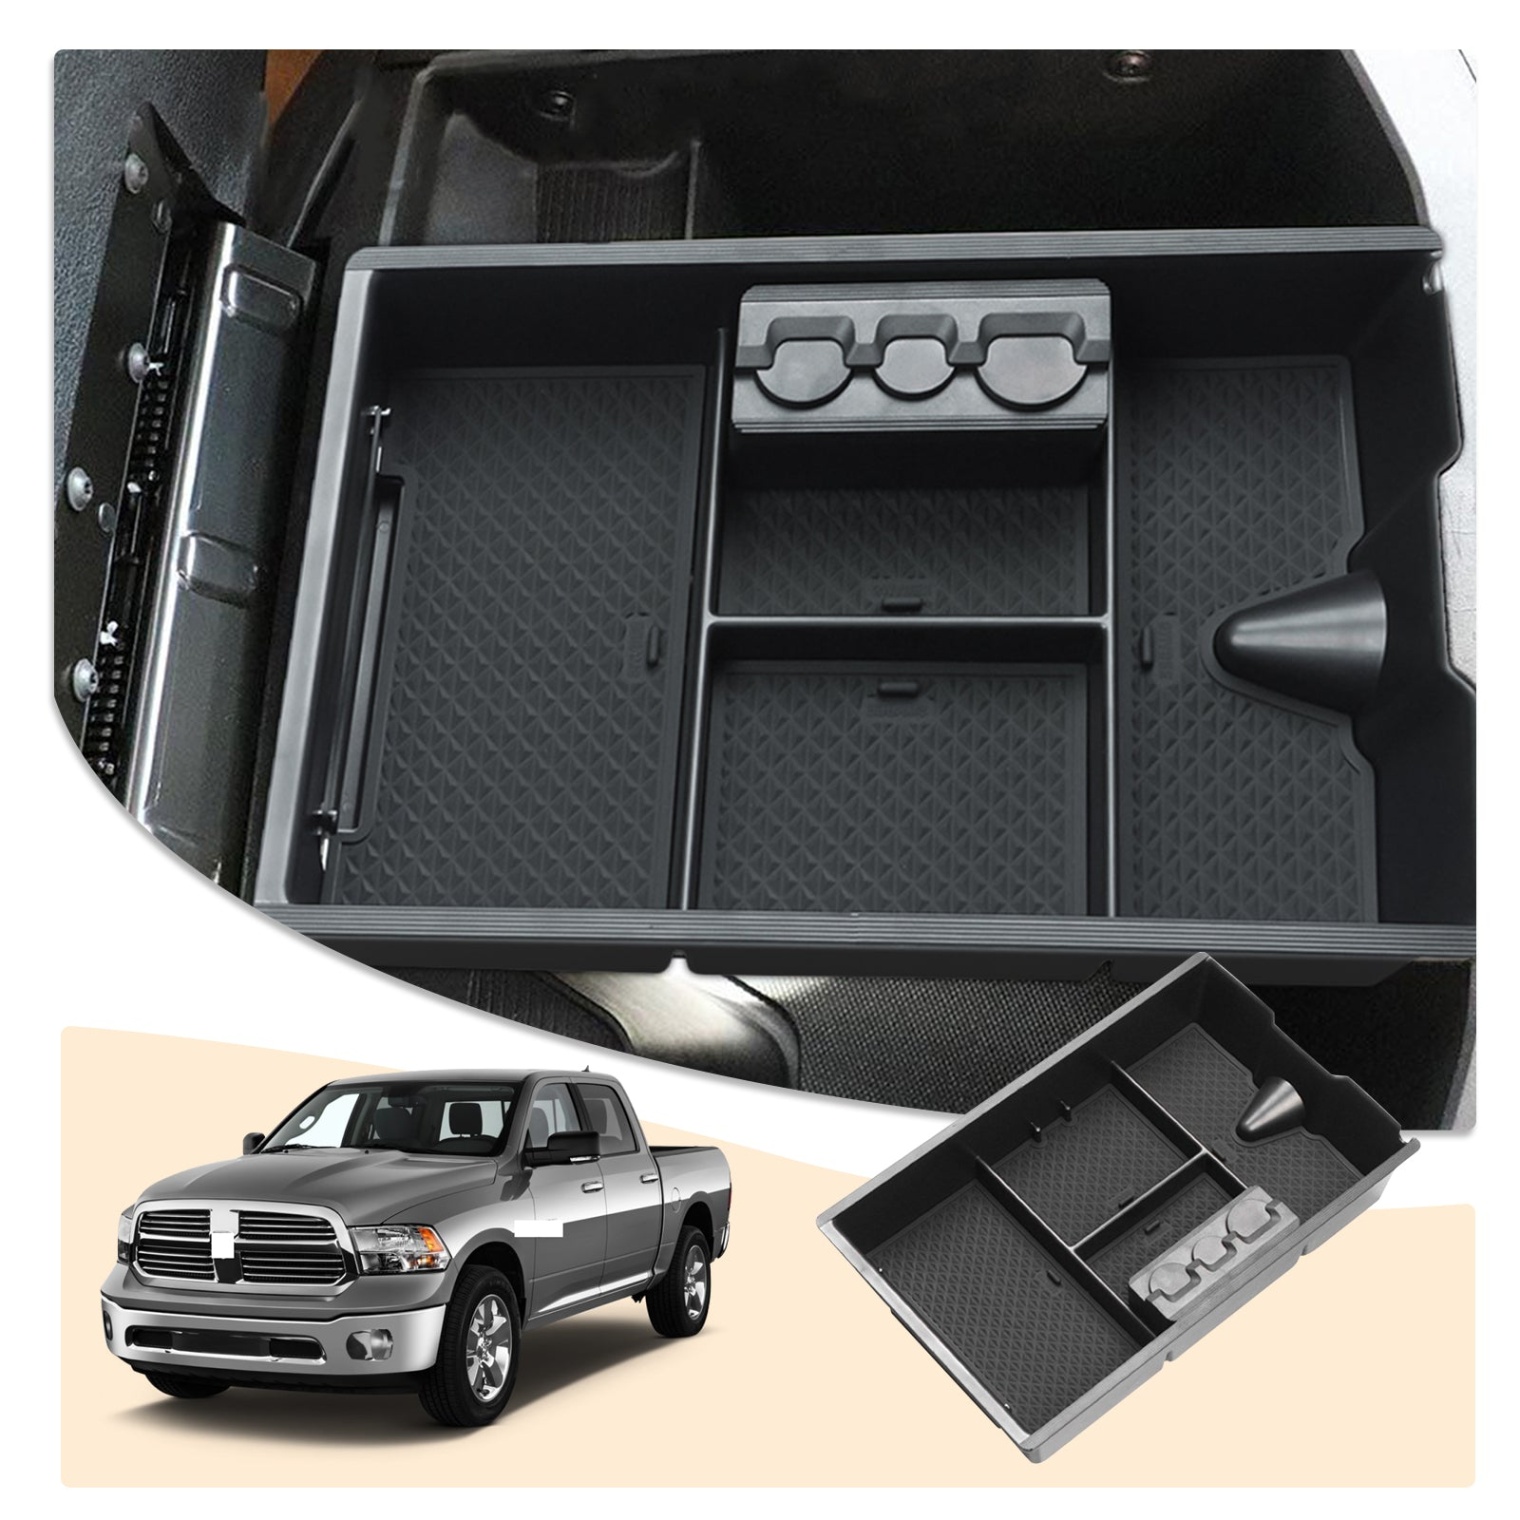 Upgrade Your Dodge Ram 1500 With Awesome Accessories For Ultimate Style!